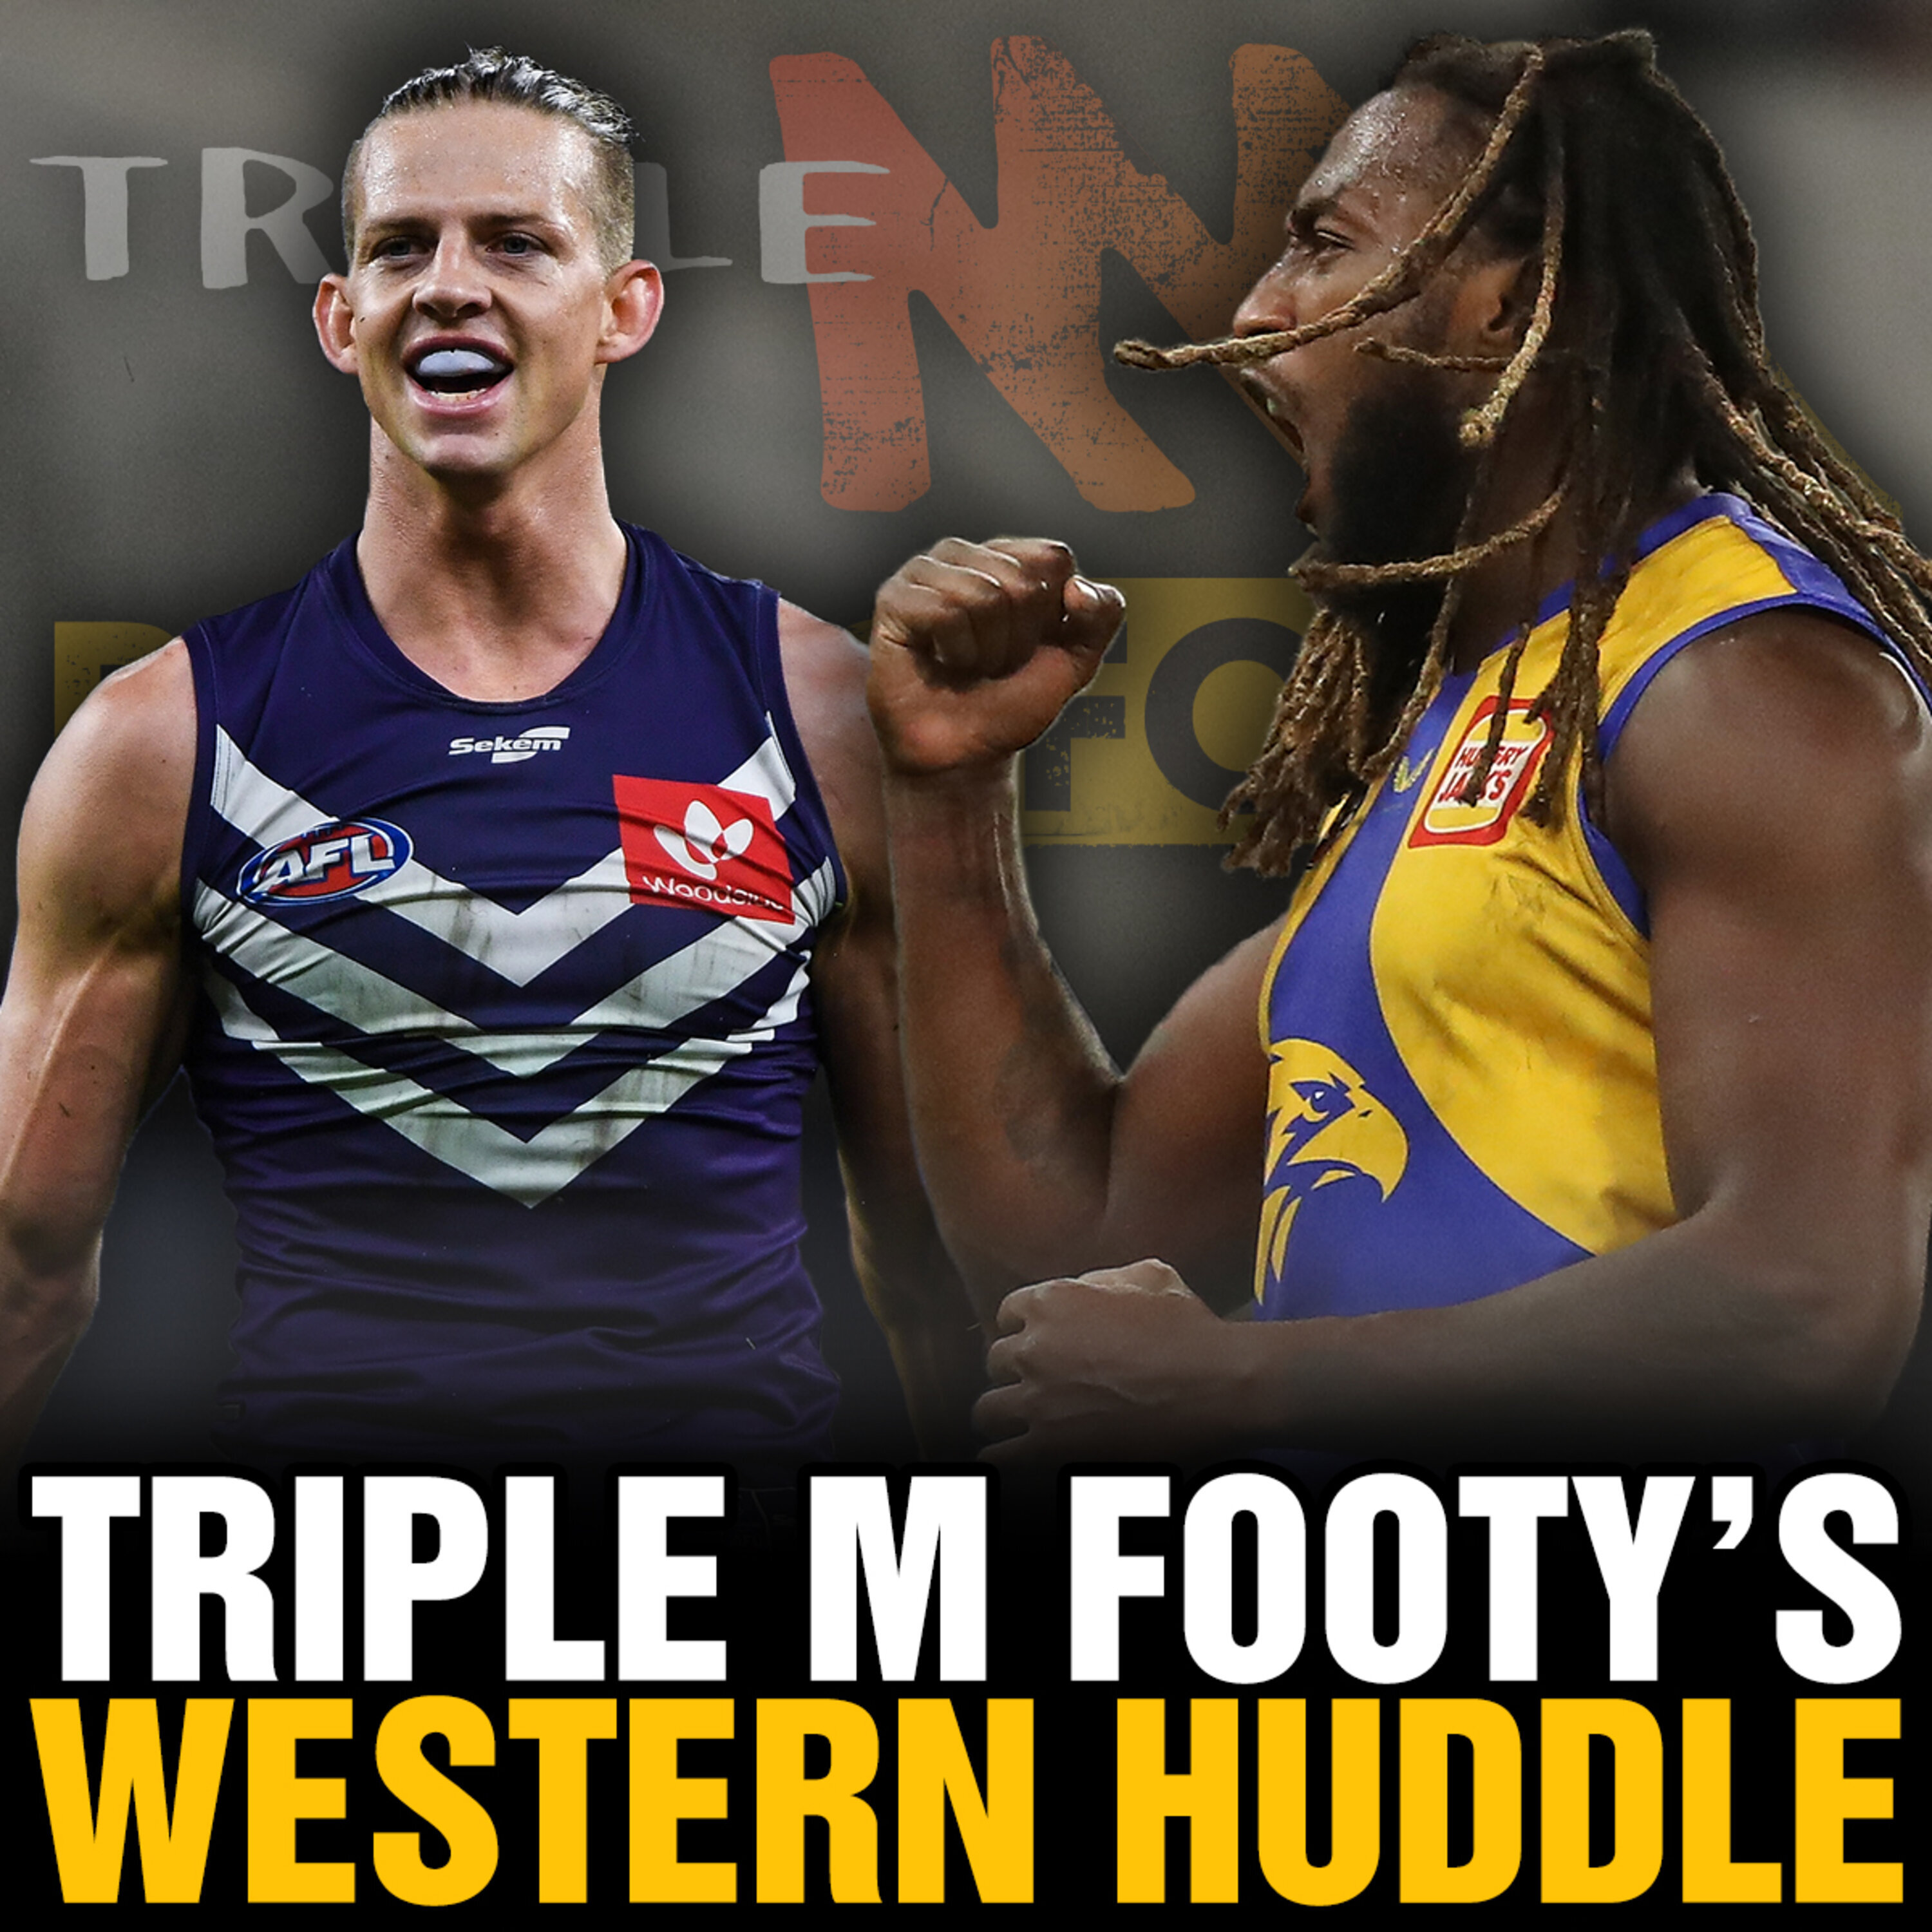 WESTERN HUDDLE | Review of Round 1, Wooden Spooners To Runners Up, Alastair Clarkson’s Coaching Mistake